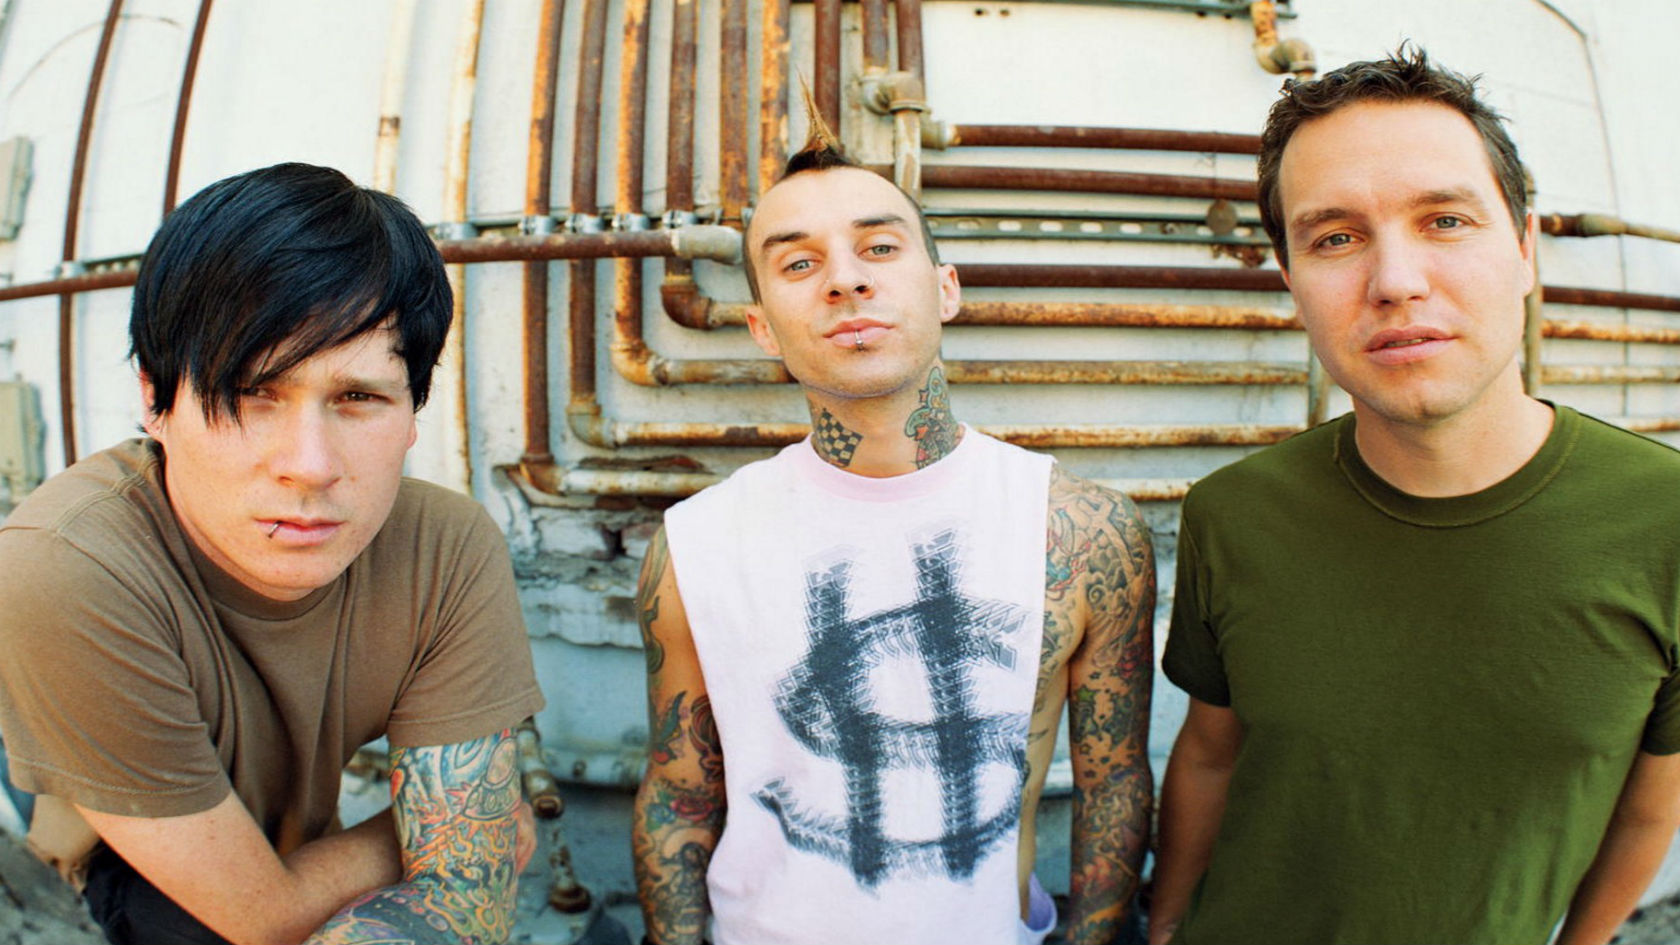 Blink 182 Reveal First Track Without Tom DeLonge, 'Bored To Death